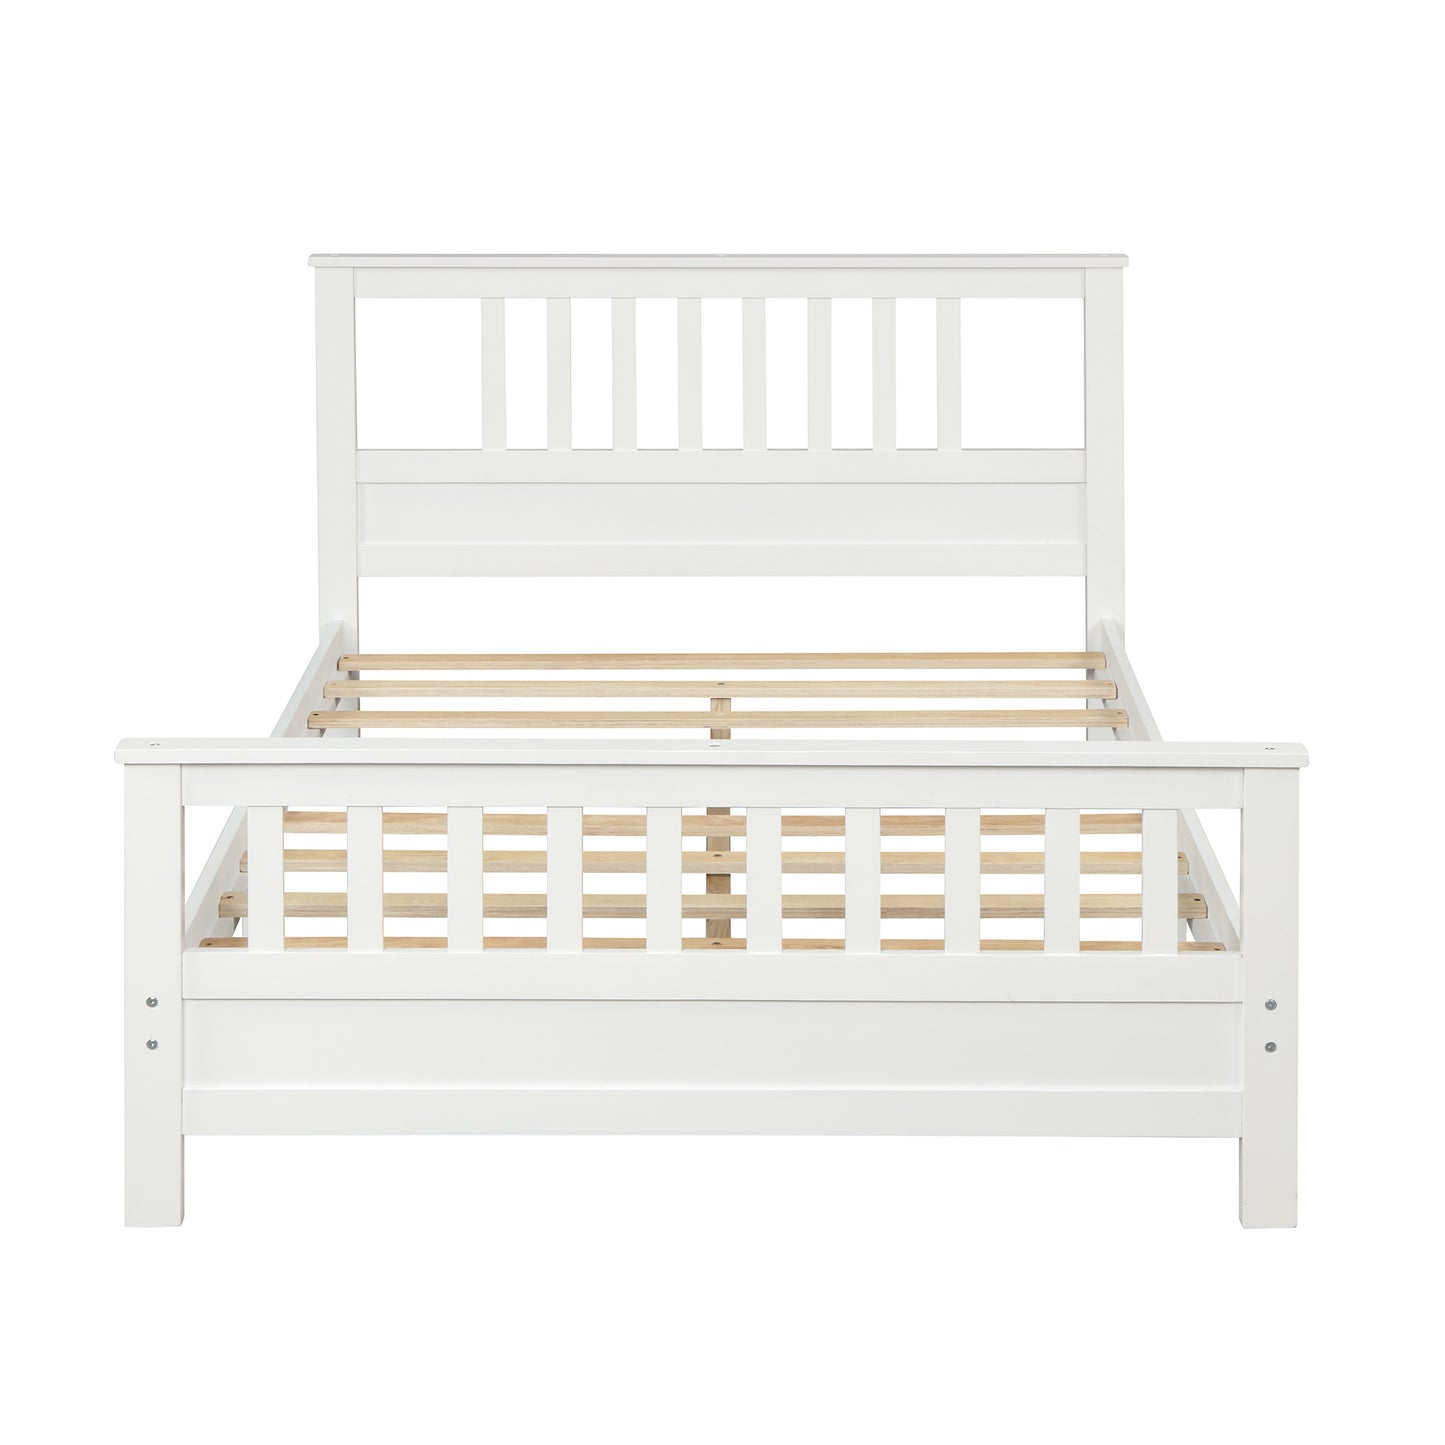 Wood Platform Bed Frame with Headboard and Footboard White RT